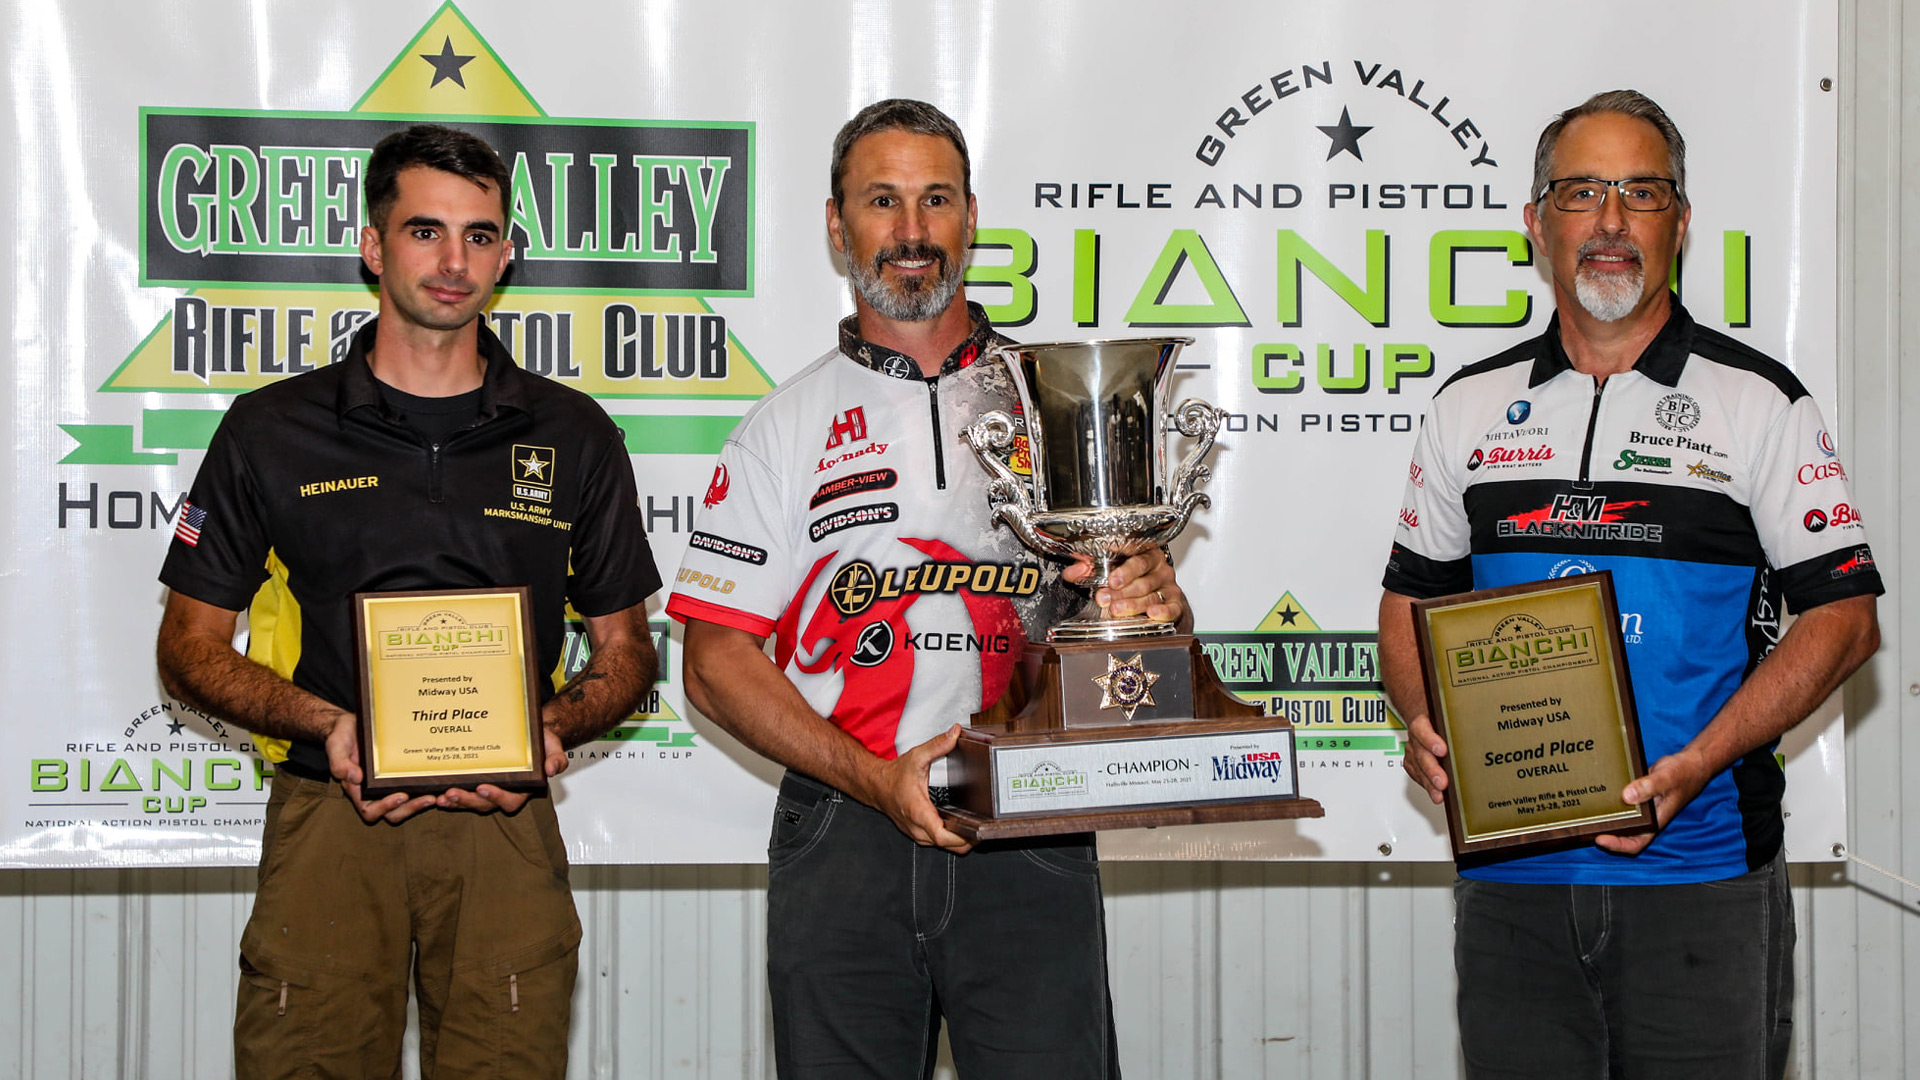 2021 Bianchi Cup Top Three Shooters